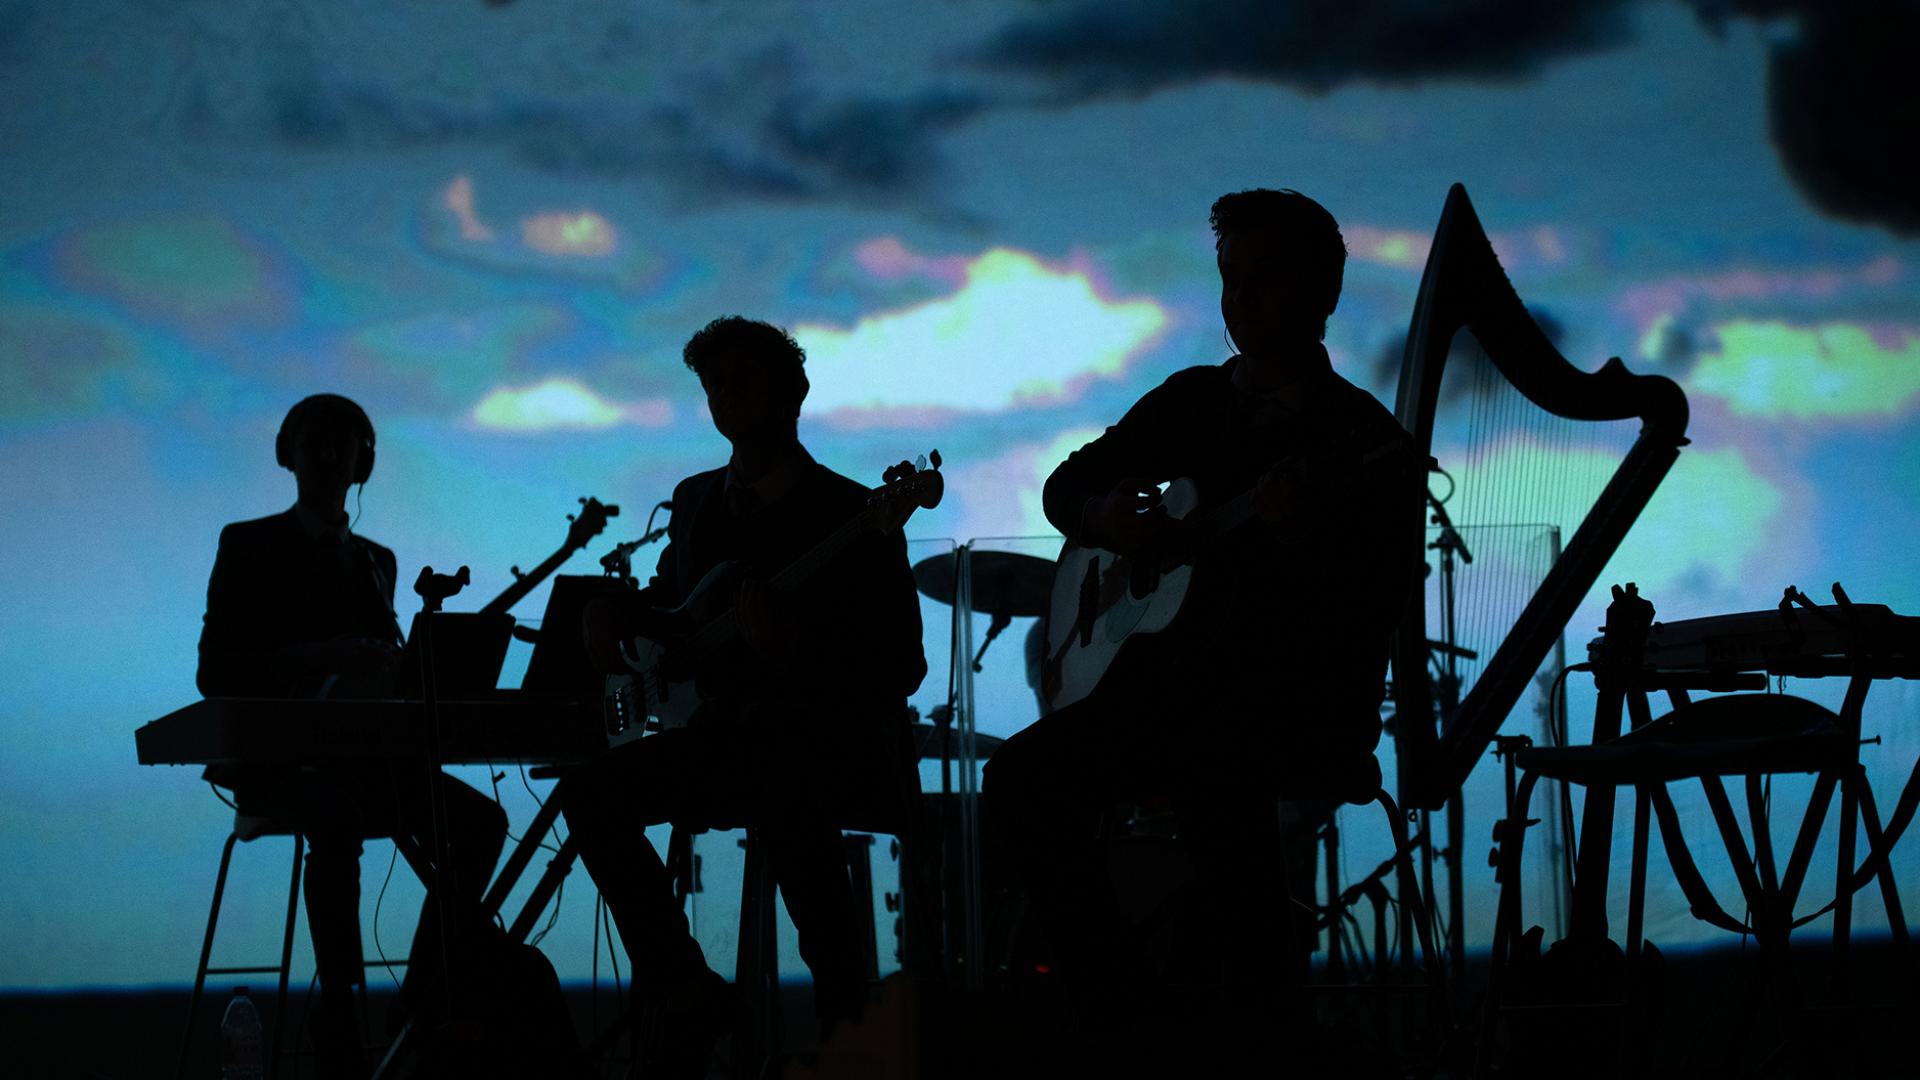 The band in silhouette 